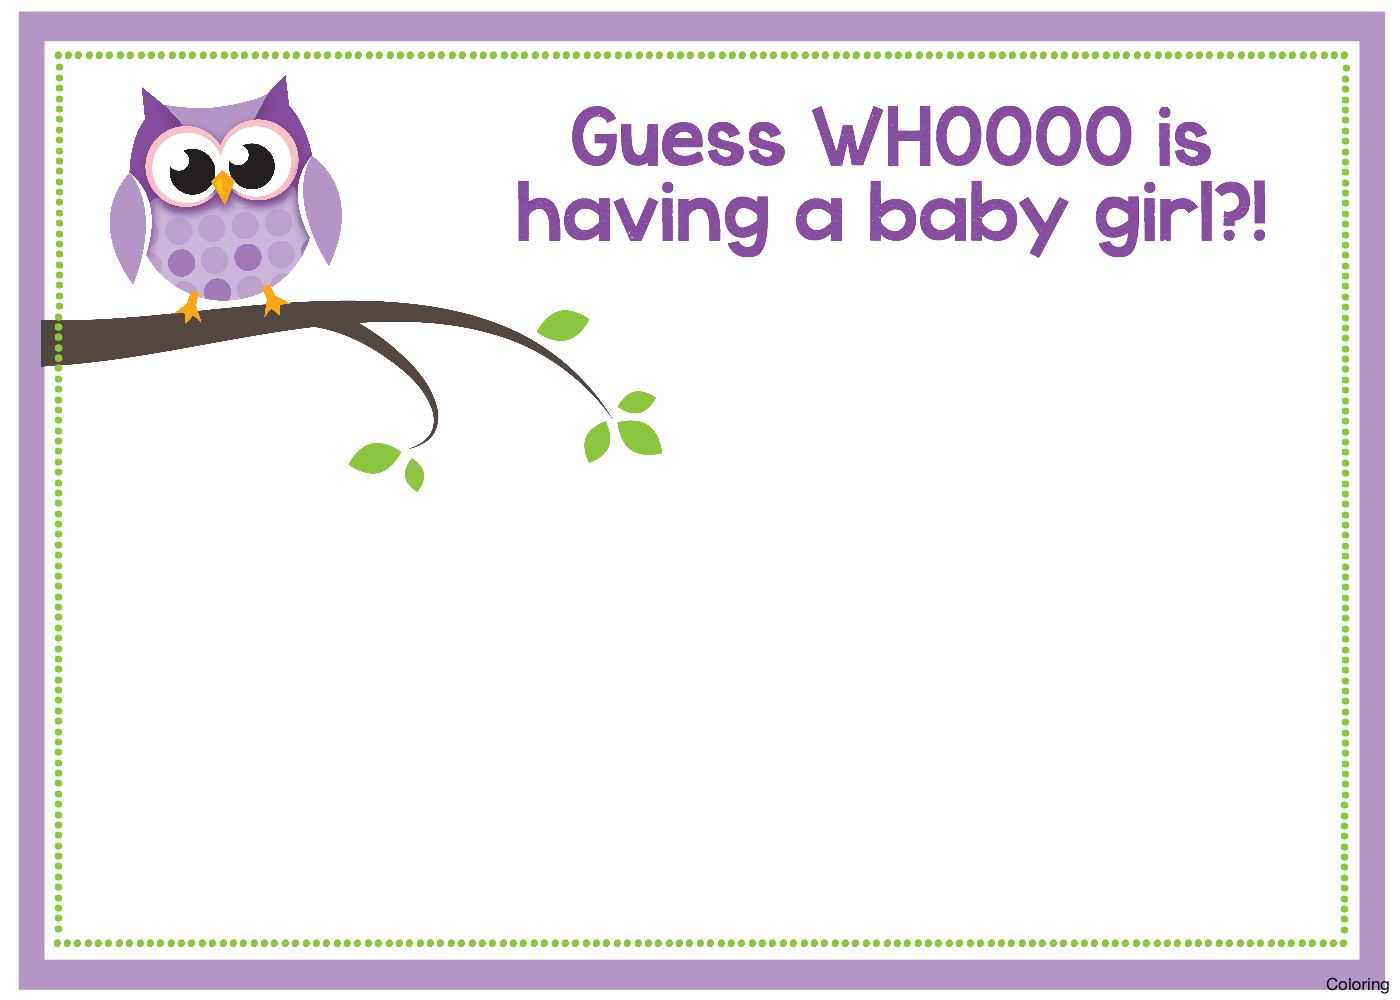 Baby Shower Bbq PNG - 159296